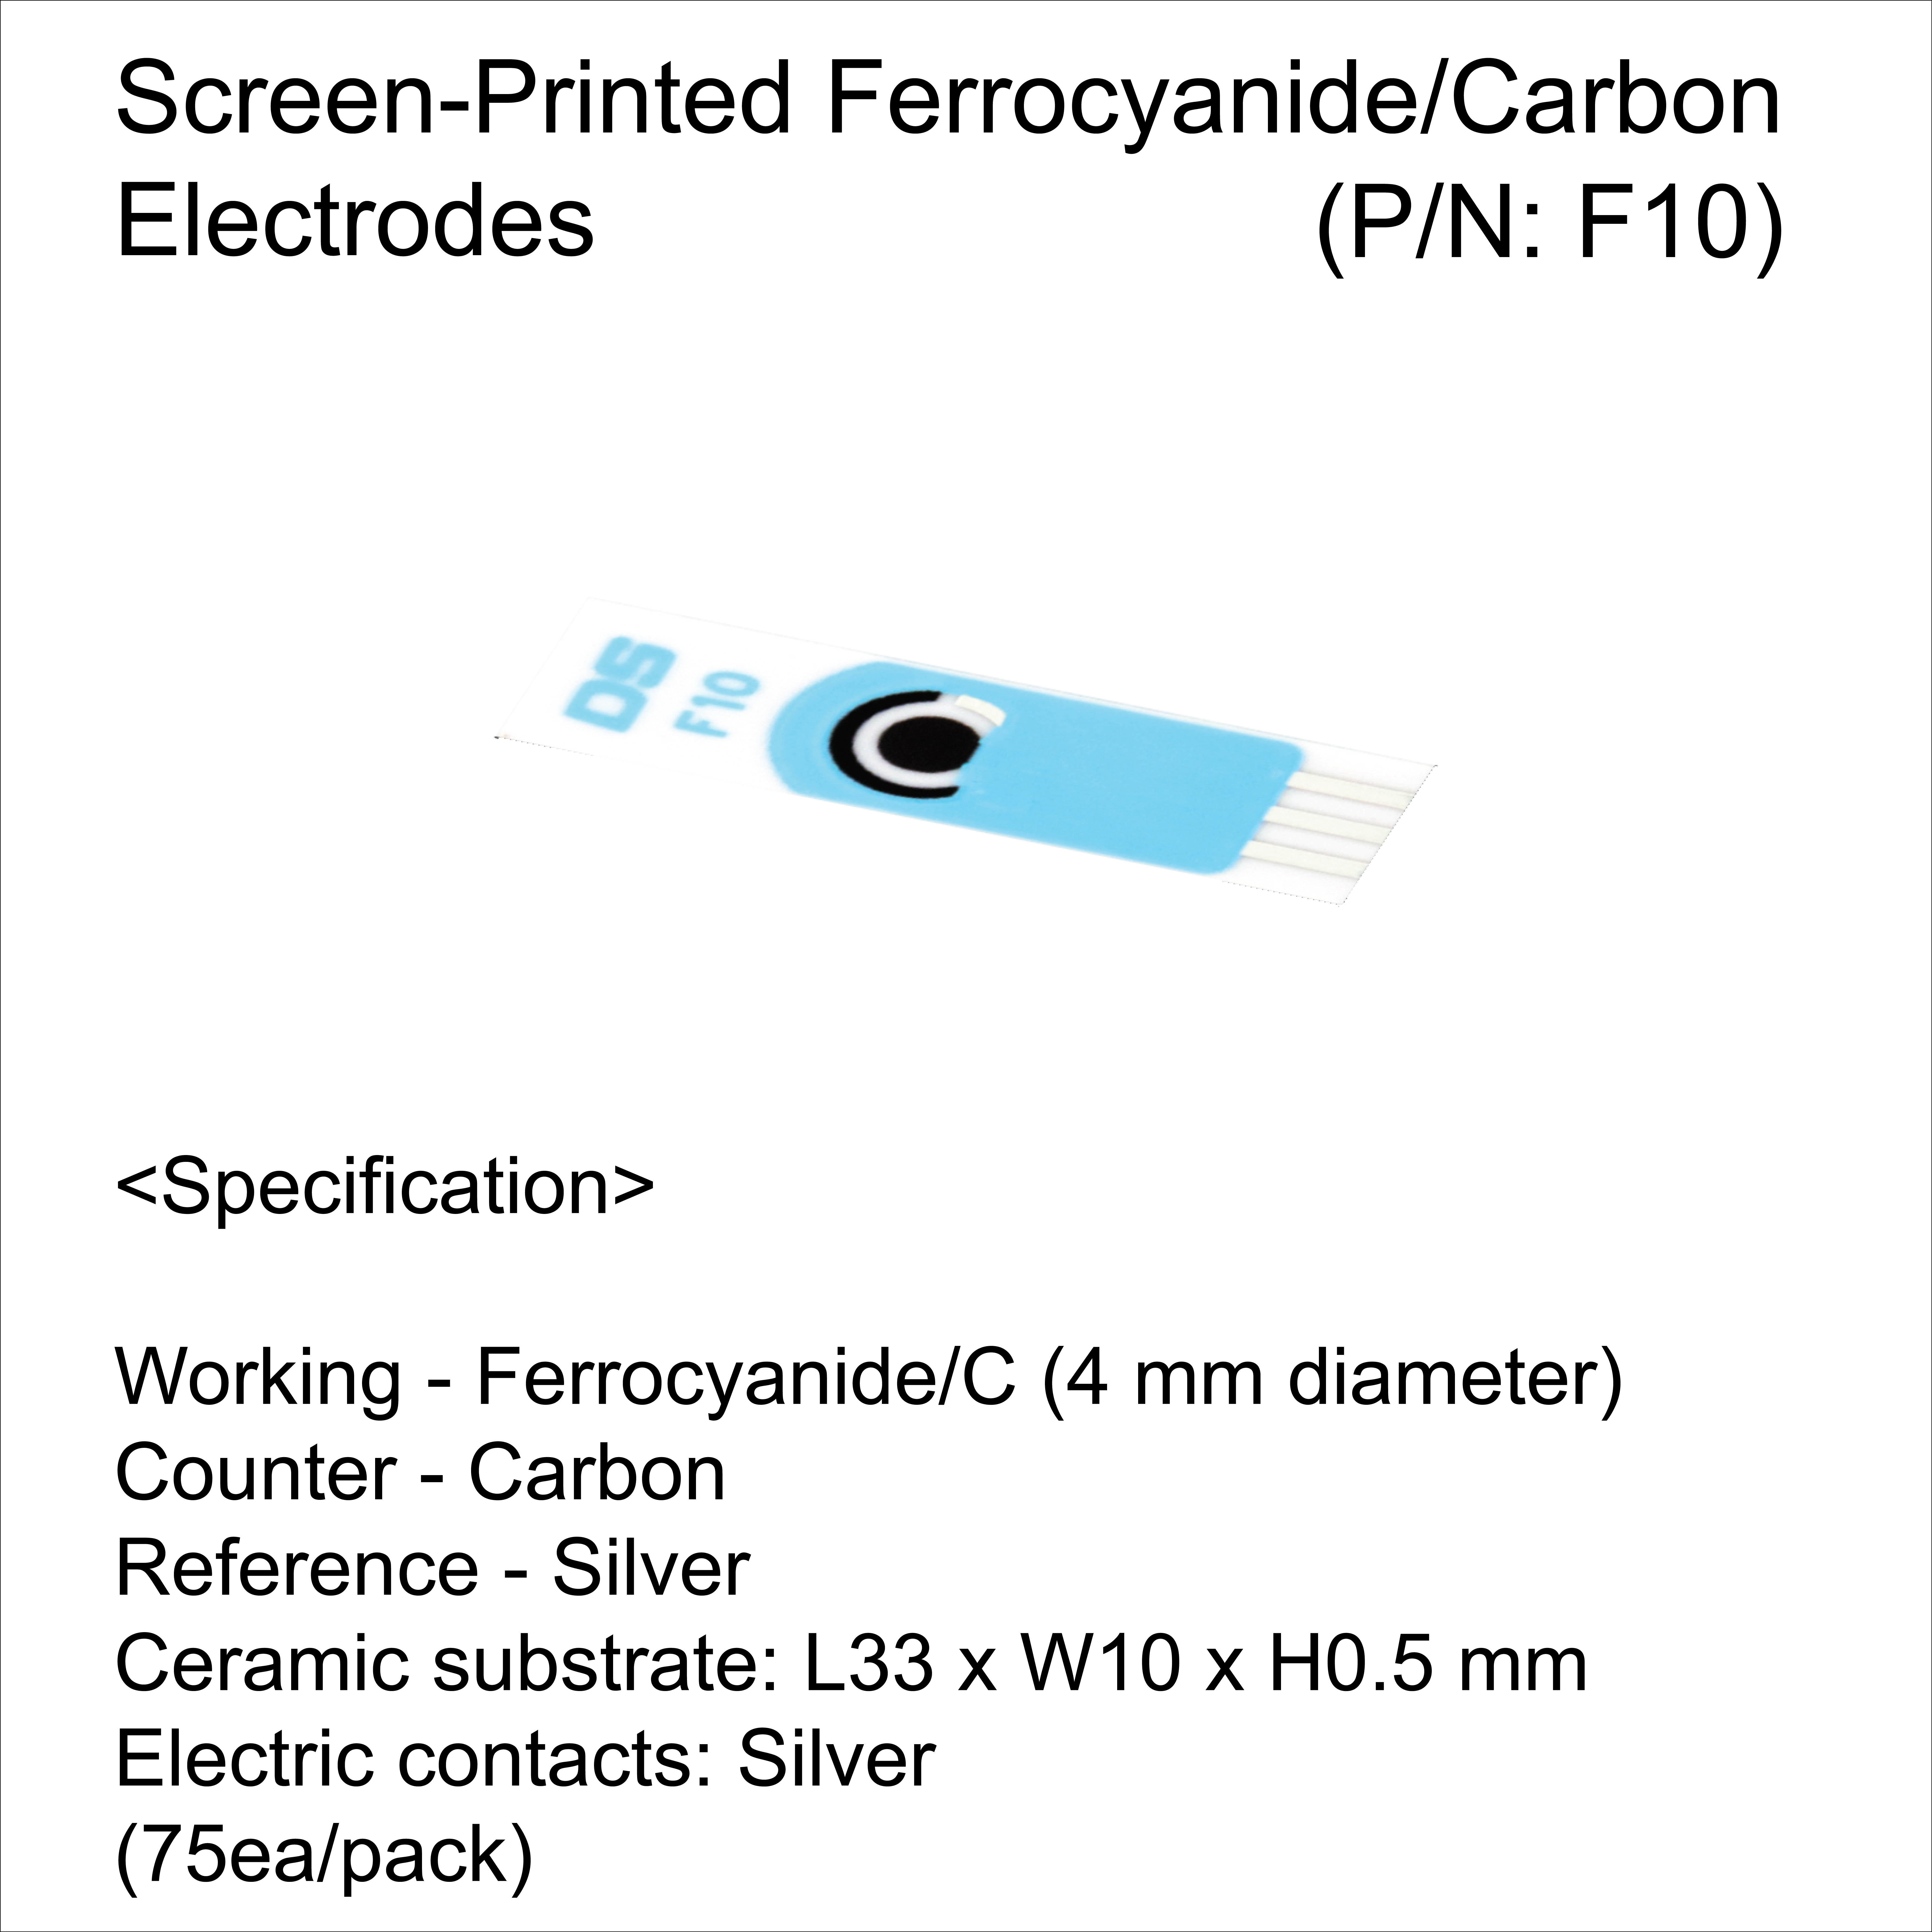 Screen-Printed Ferrocyanide/Carbon Electrodes